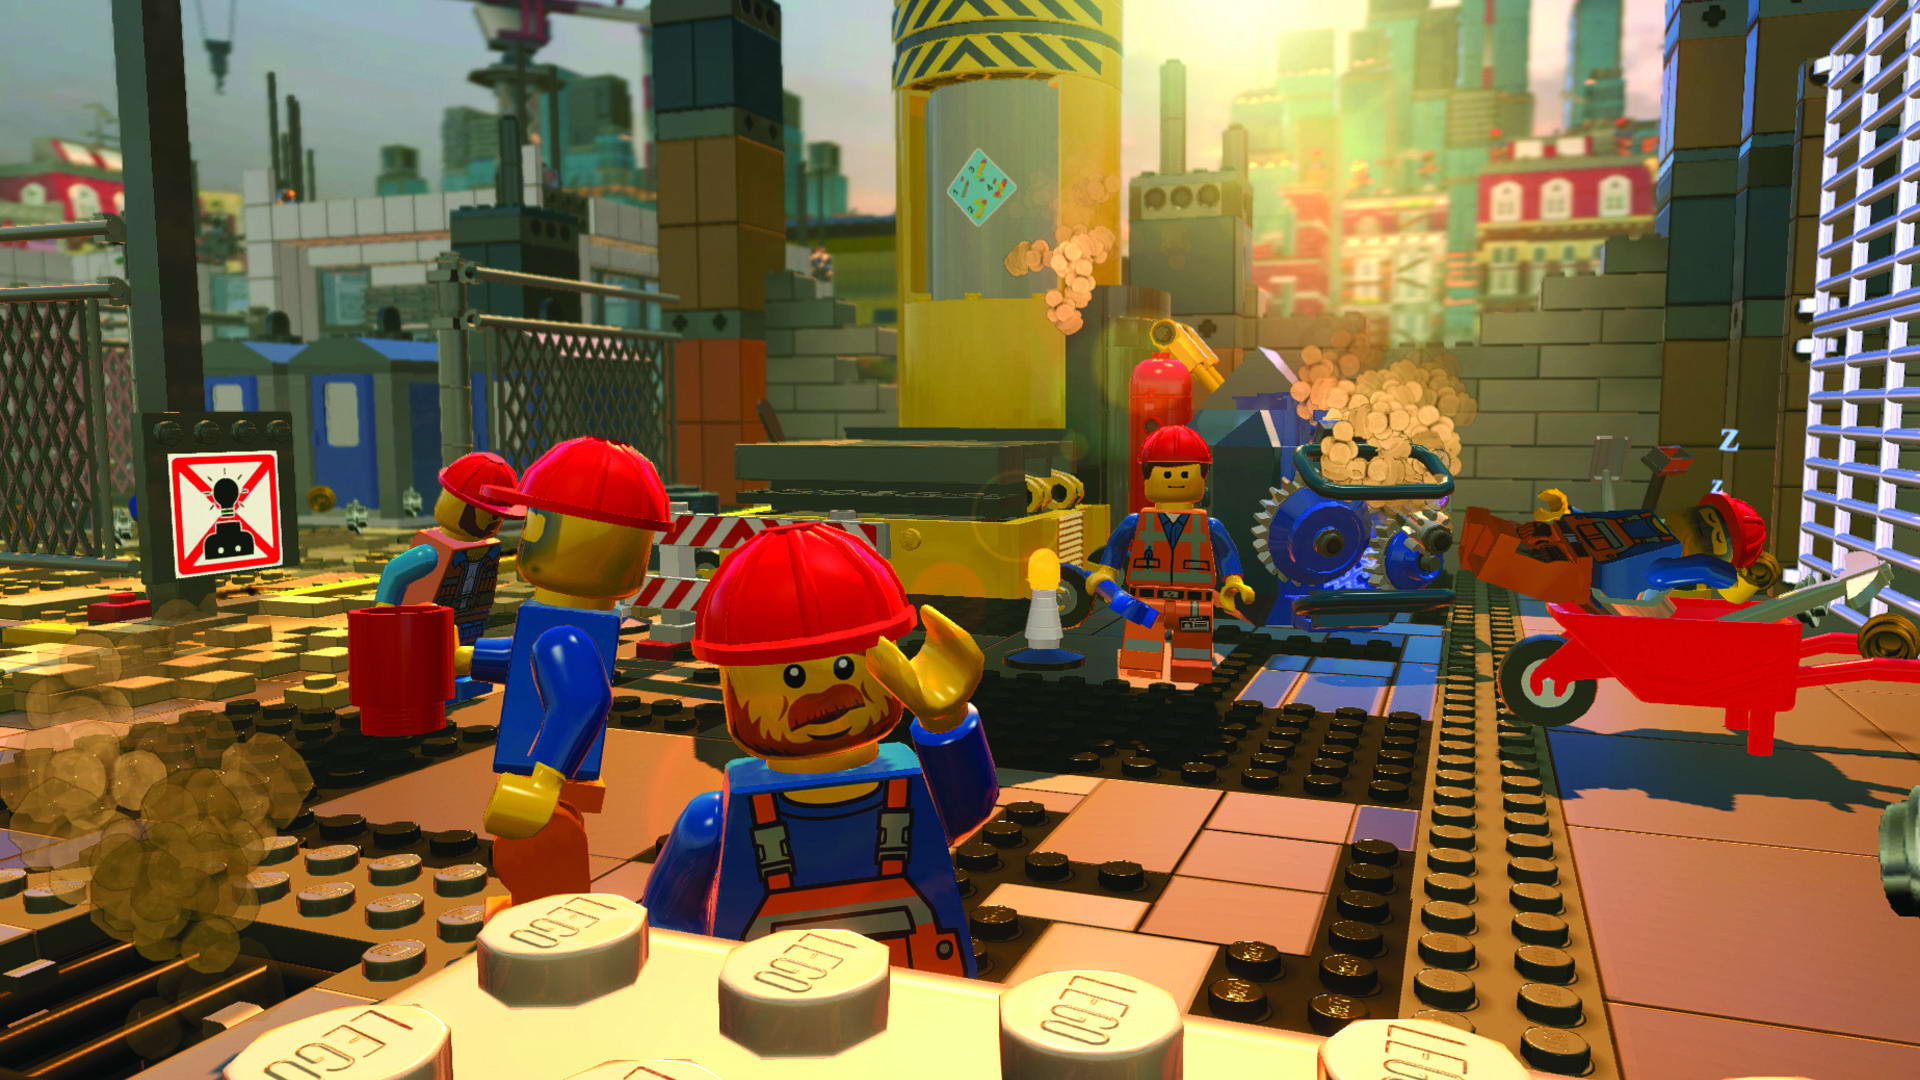 The LEGO Movie - Videogame